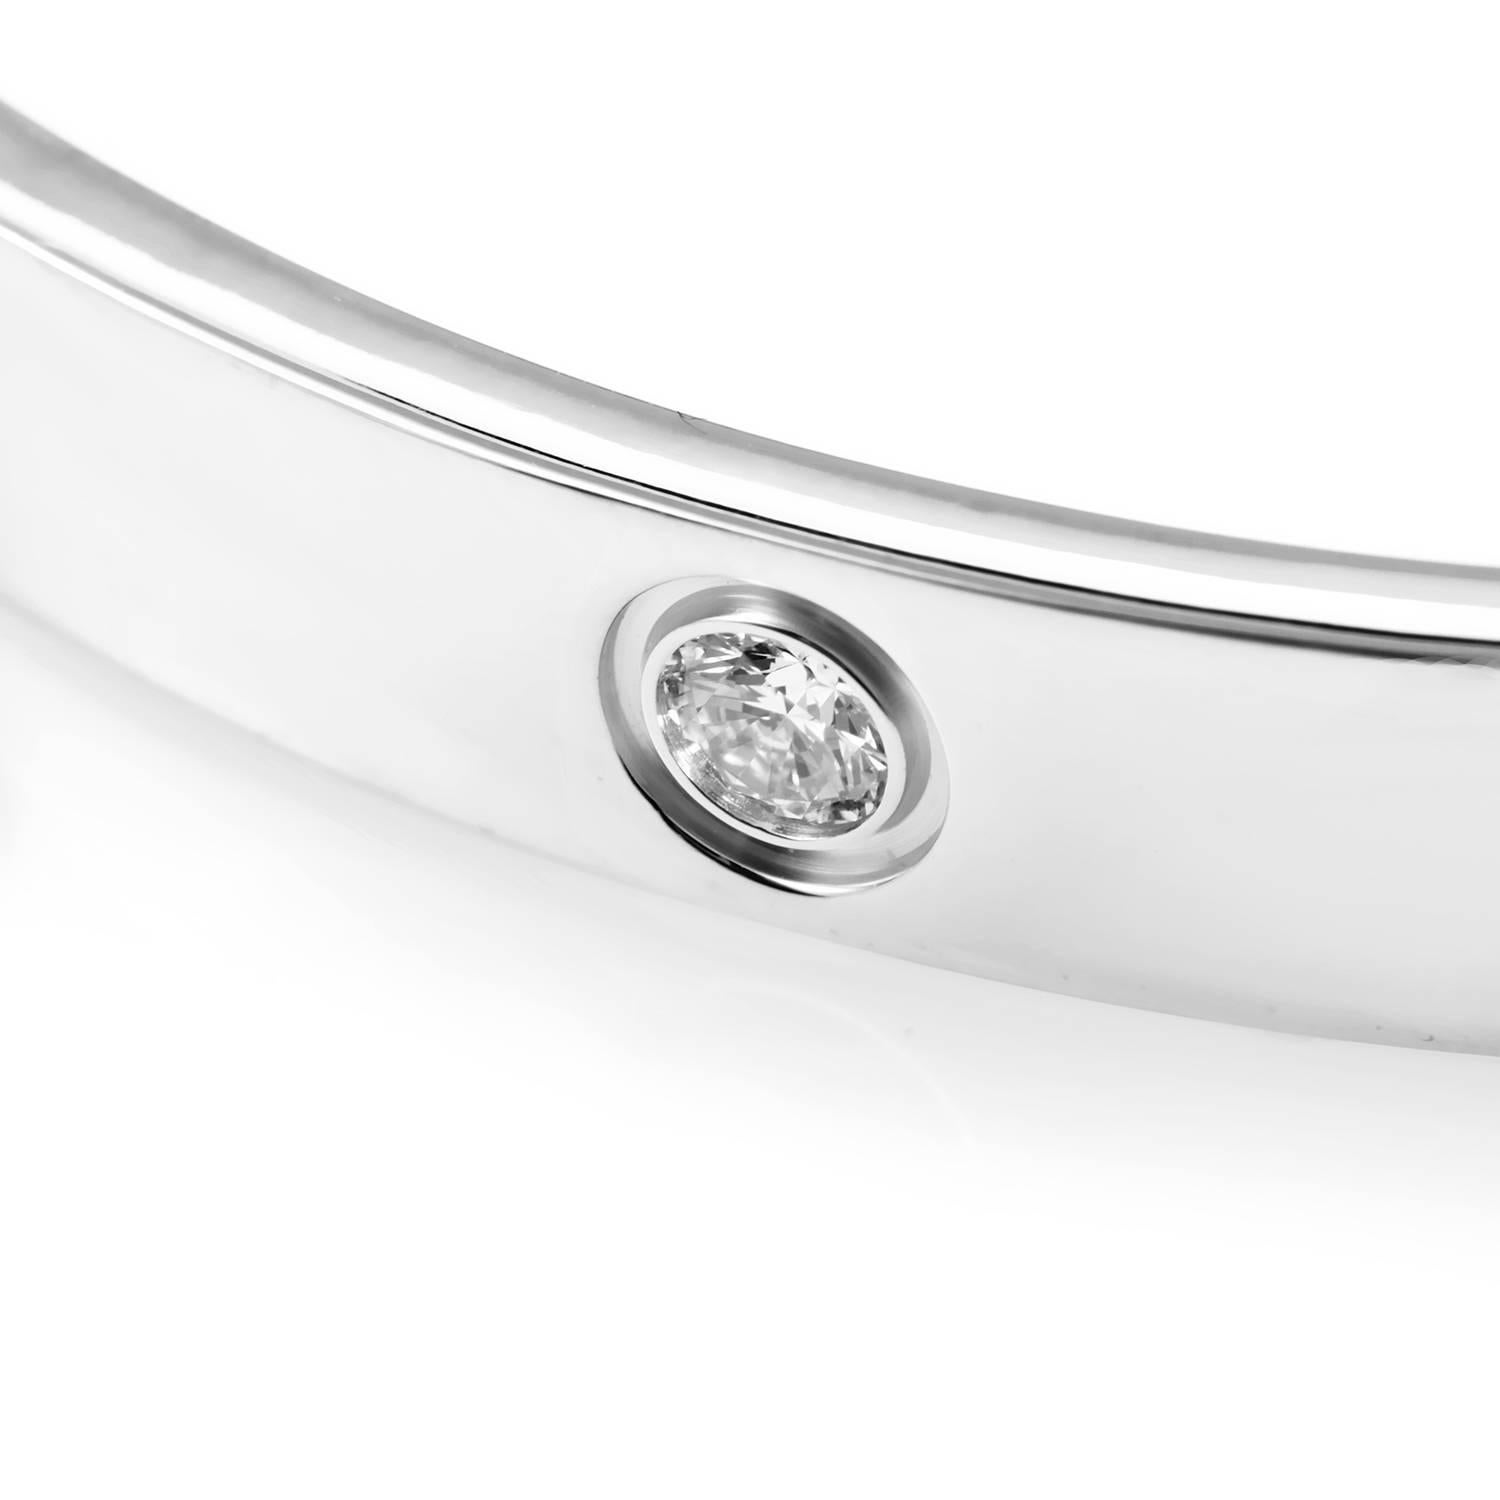 Cartier delivers a regal design in this 18K White Gold Bracelet. Evenly distributed diamonds alternate with the Cartier screw motif engraved in the precious metal's rotation. Lastly, a velvet bag provides safe haven to this gleaming treasure while a